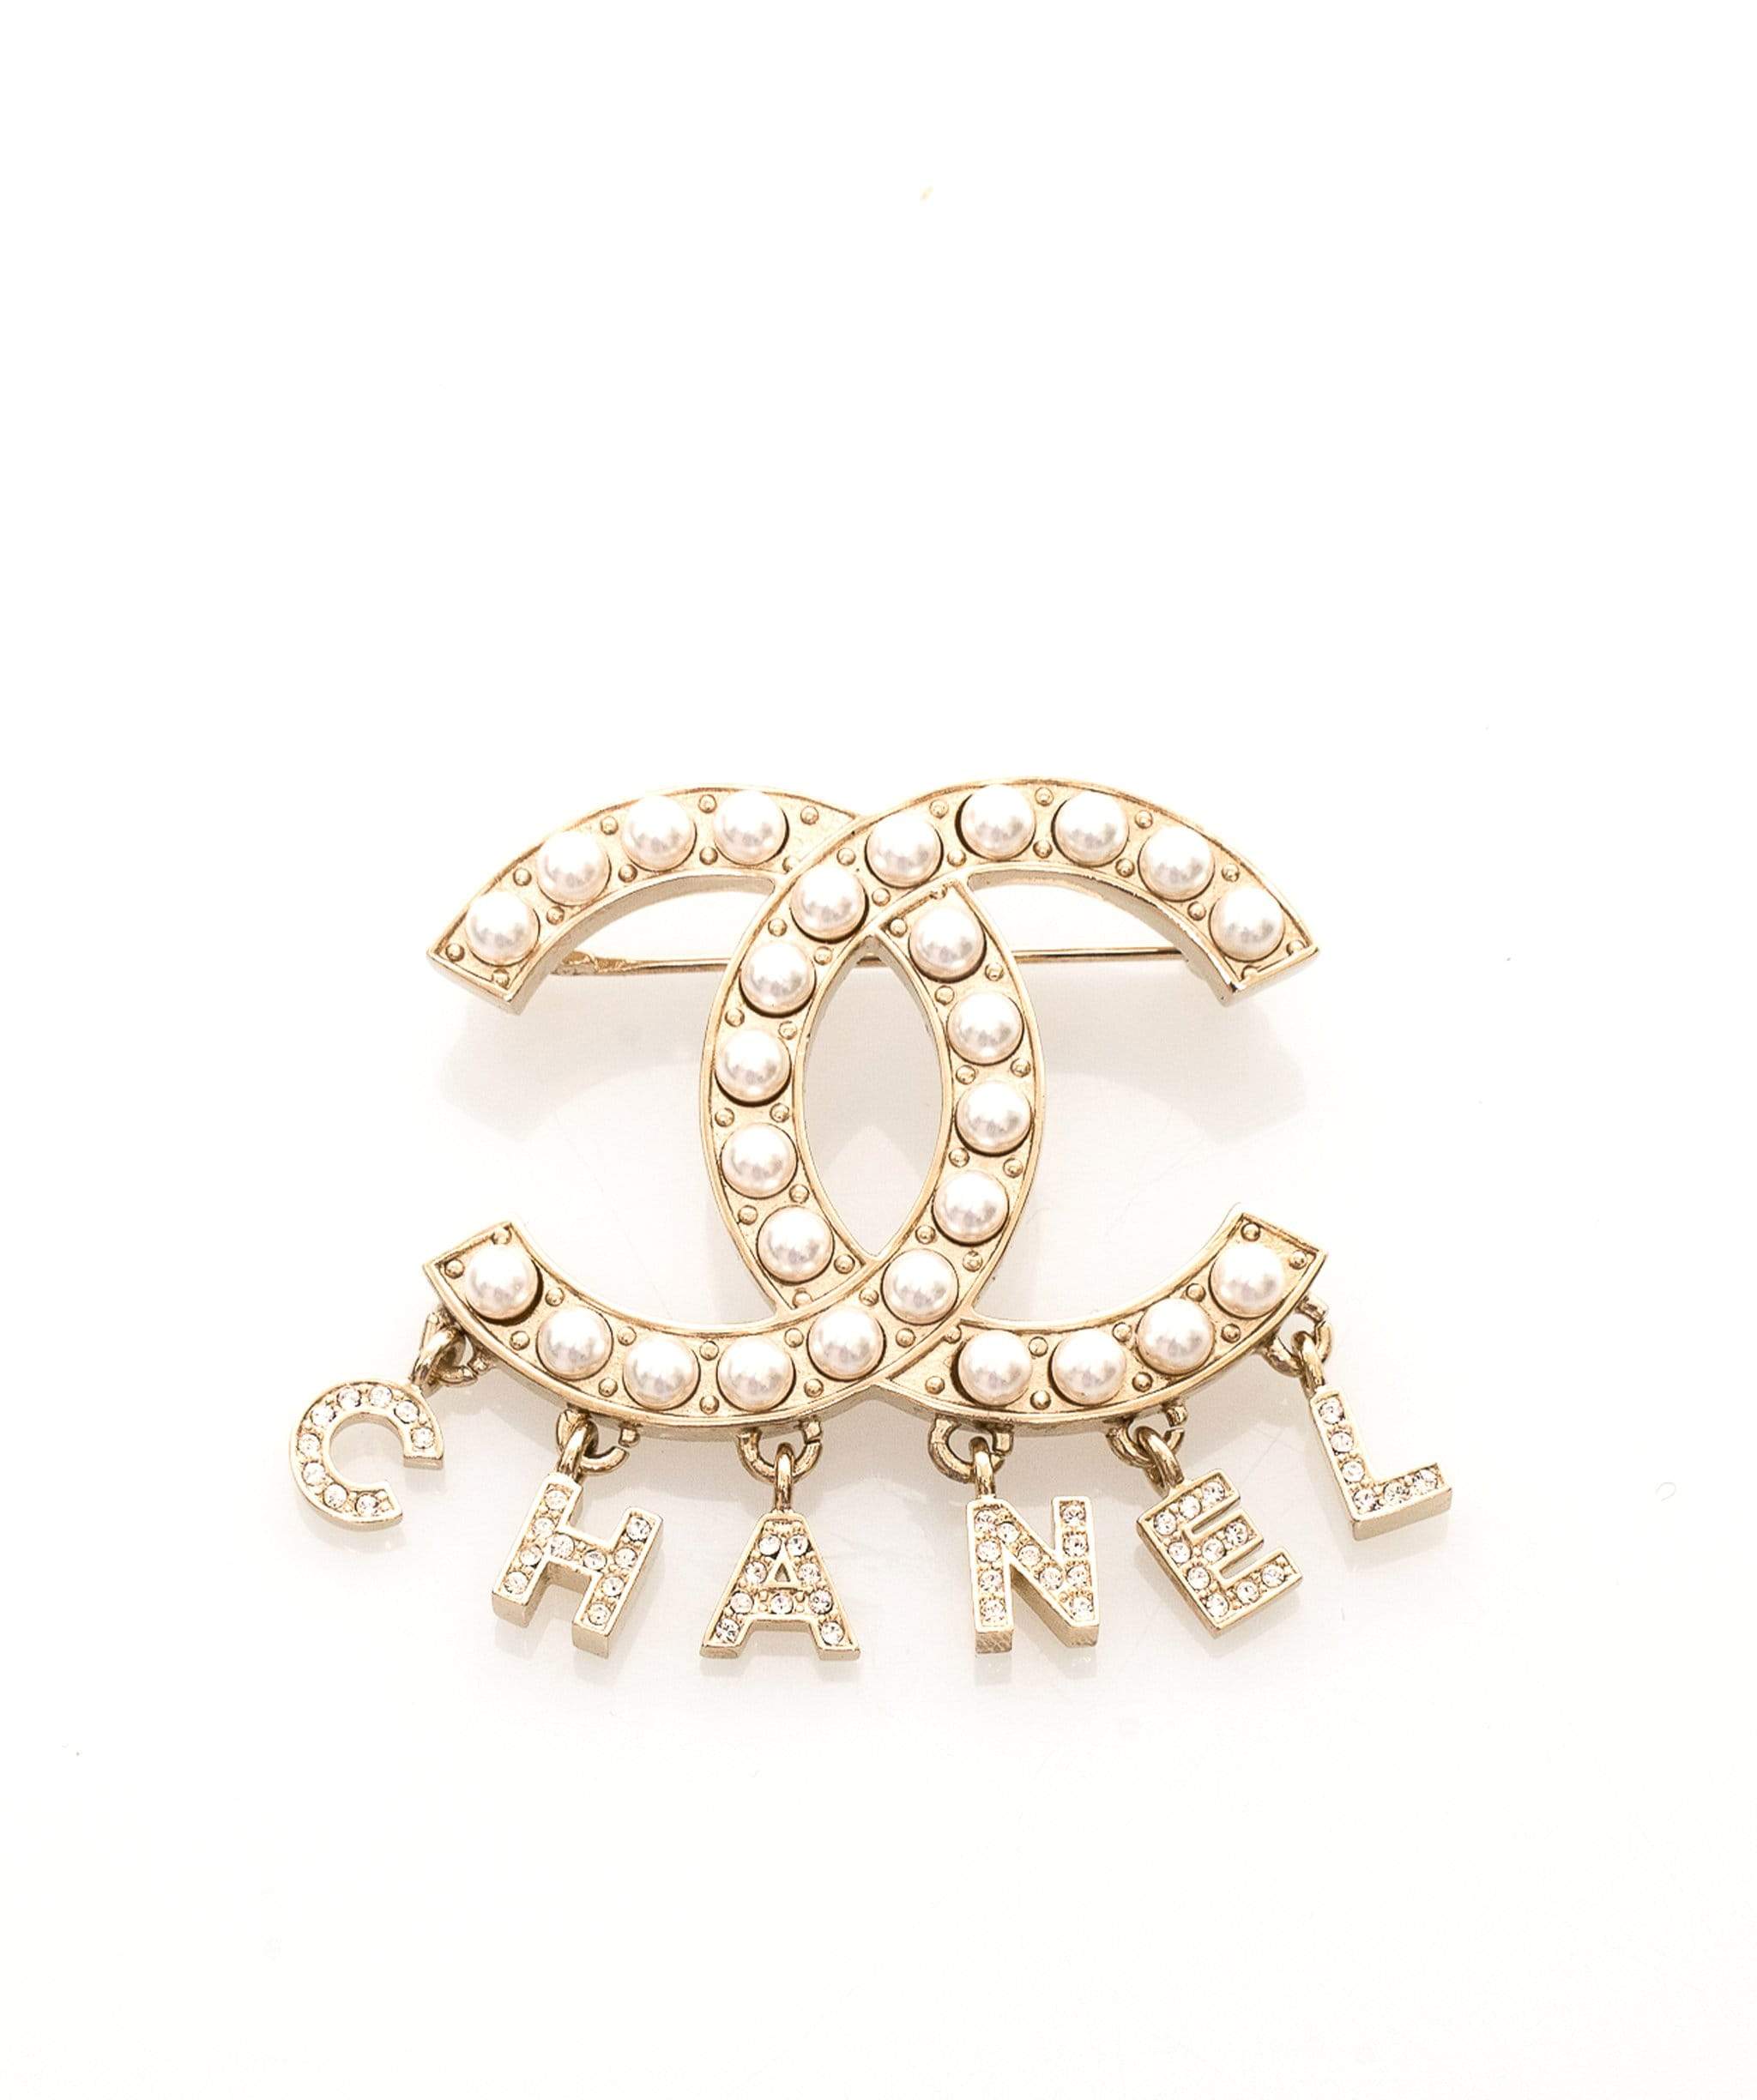 Chanel CC Pearl Brooch with Chanel Initials Drop MW1230